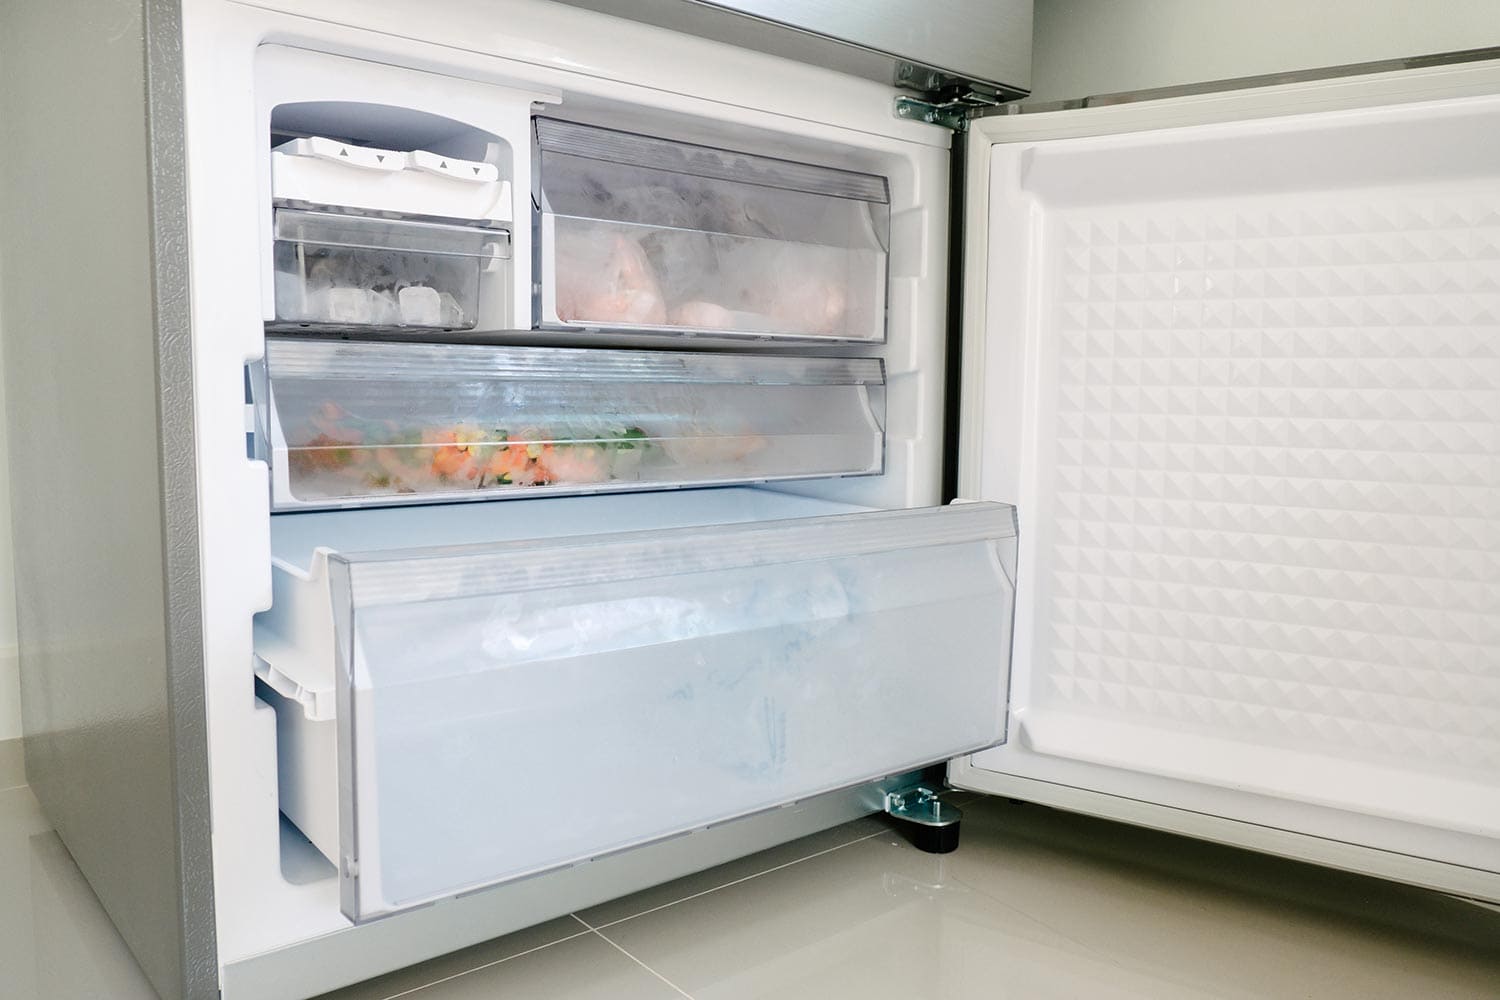 Bottom freezer of the refrigerator with open drawer